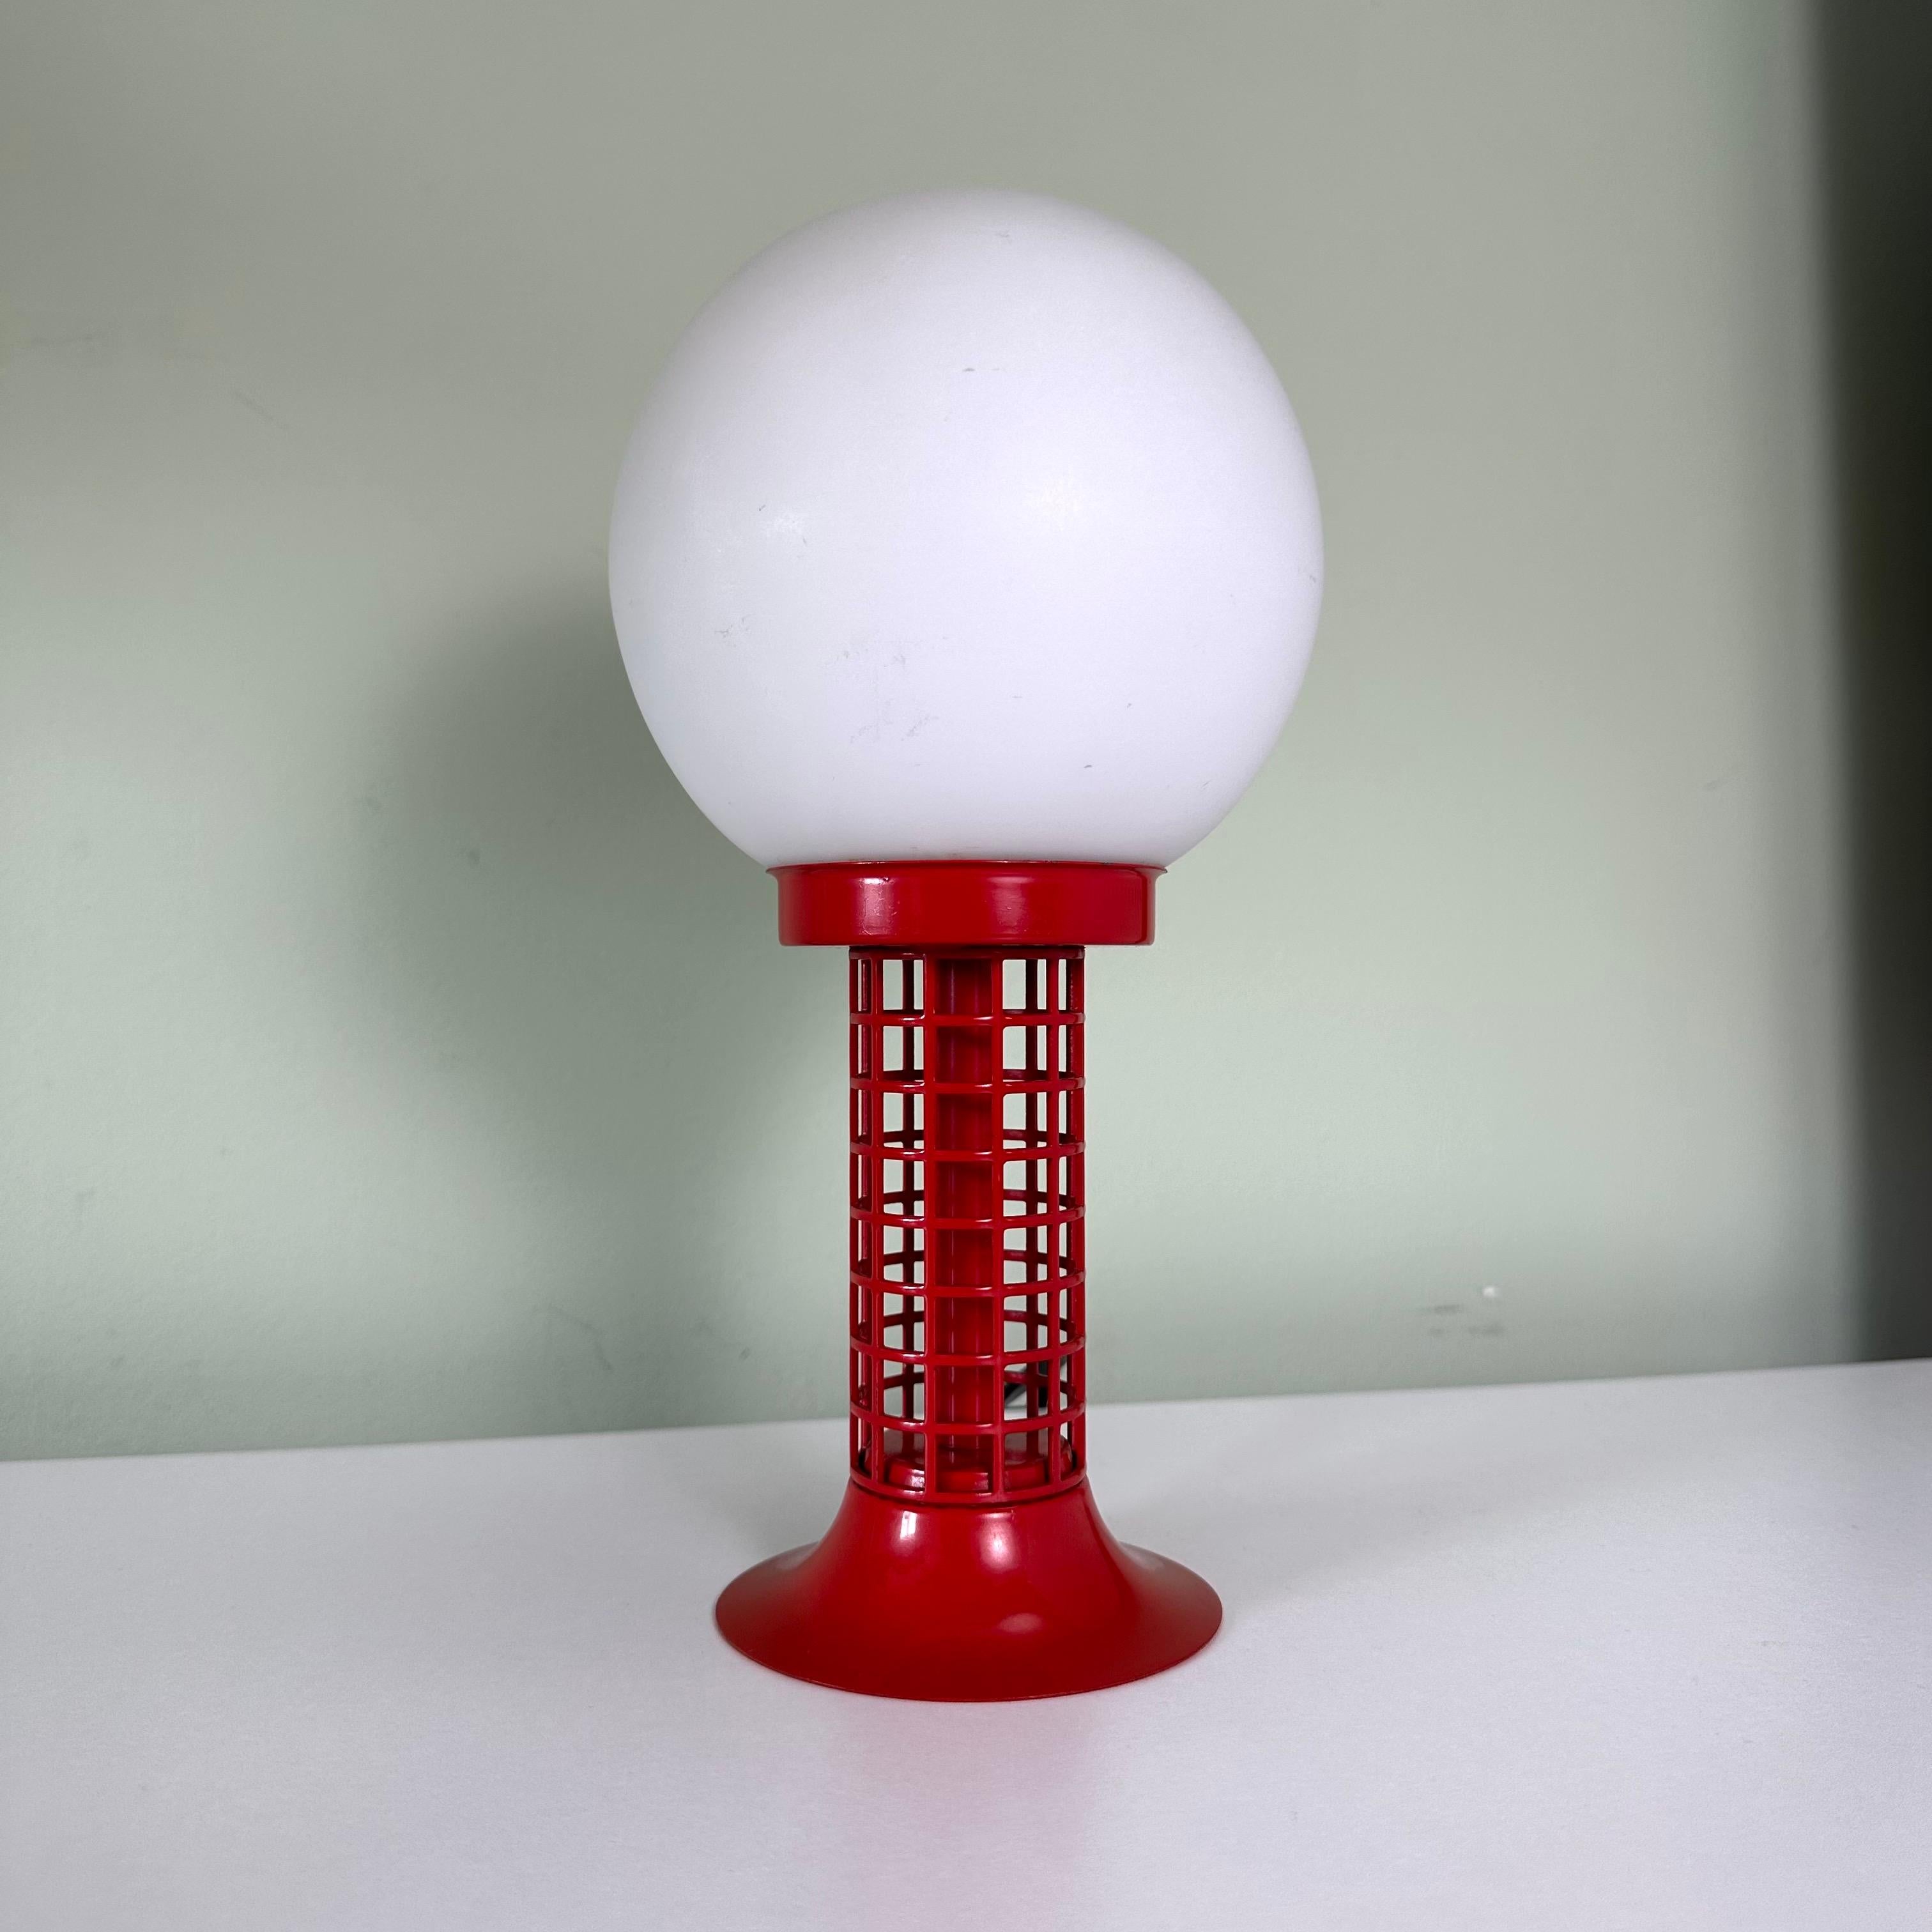 This is a single vintage 1970s table lamp with a modernist style with a white glass globe and a red metal base. Playing on primary colors in red and white, the top half of the lamp is an illuminated white frosted spherical glass globe shade,